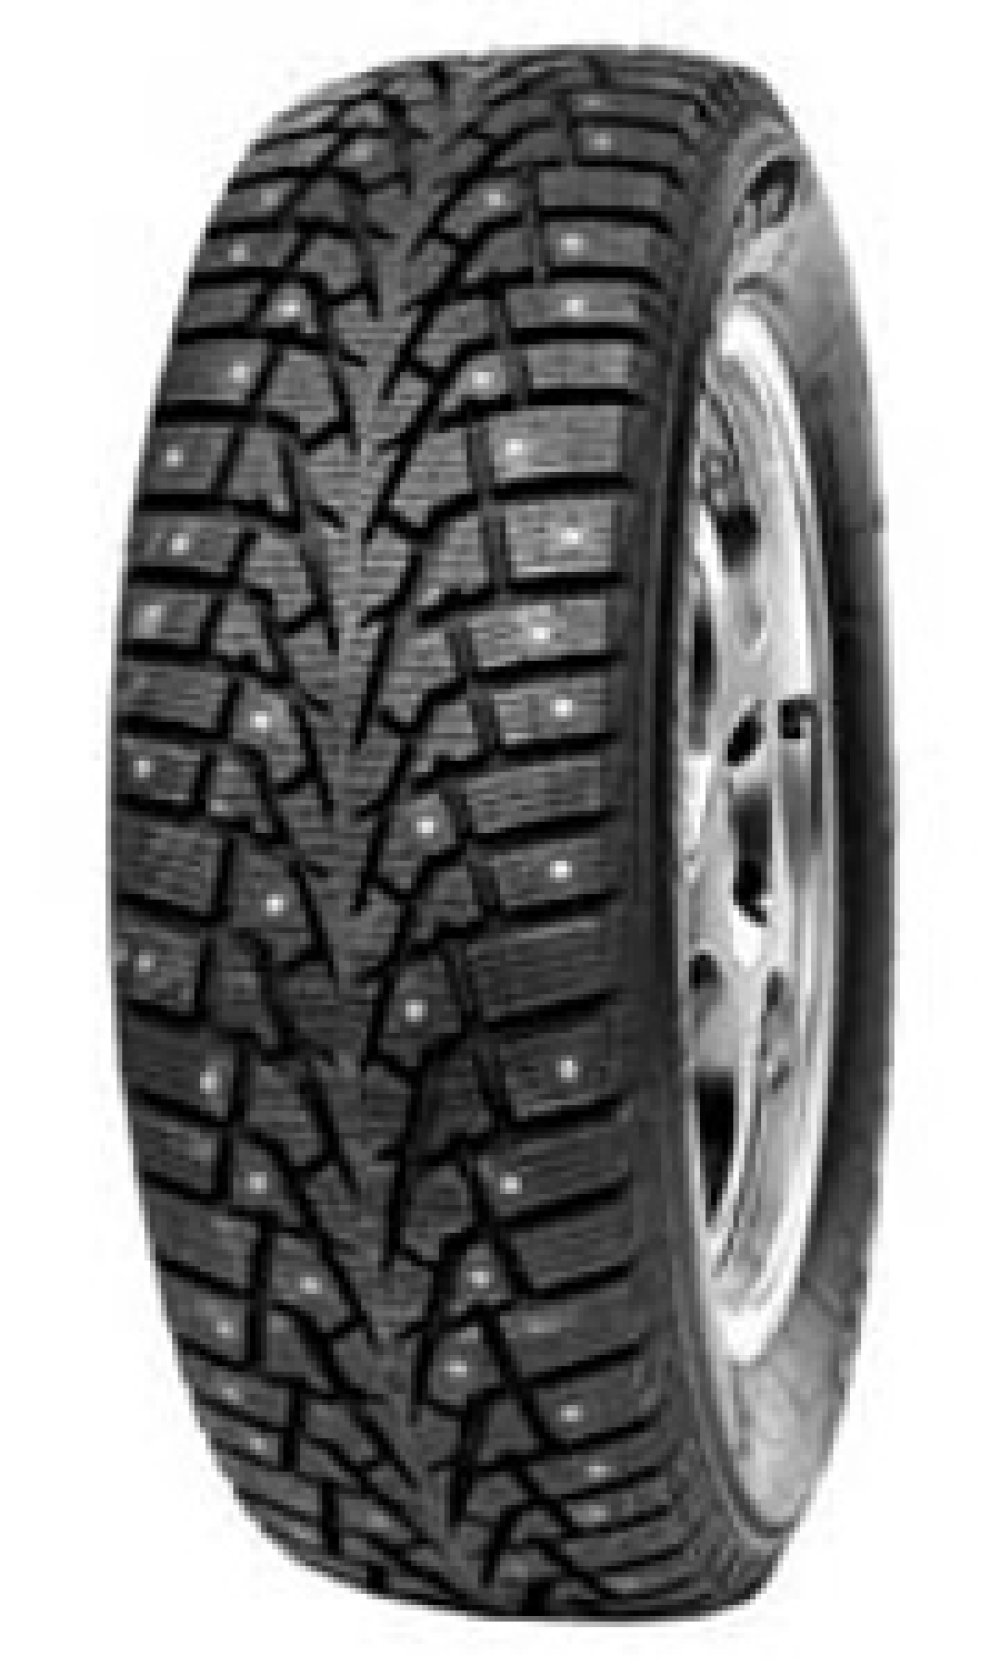 Maxxis Premitra Ice Nord NS5 ( 225/65 R17 102T, bespiked ) von Maxxis